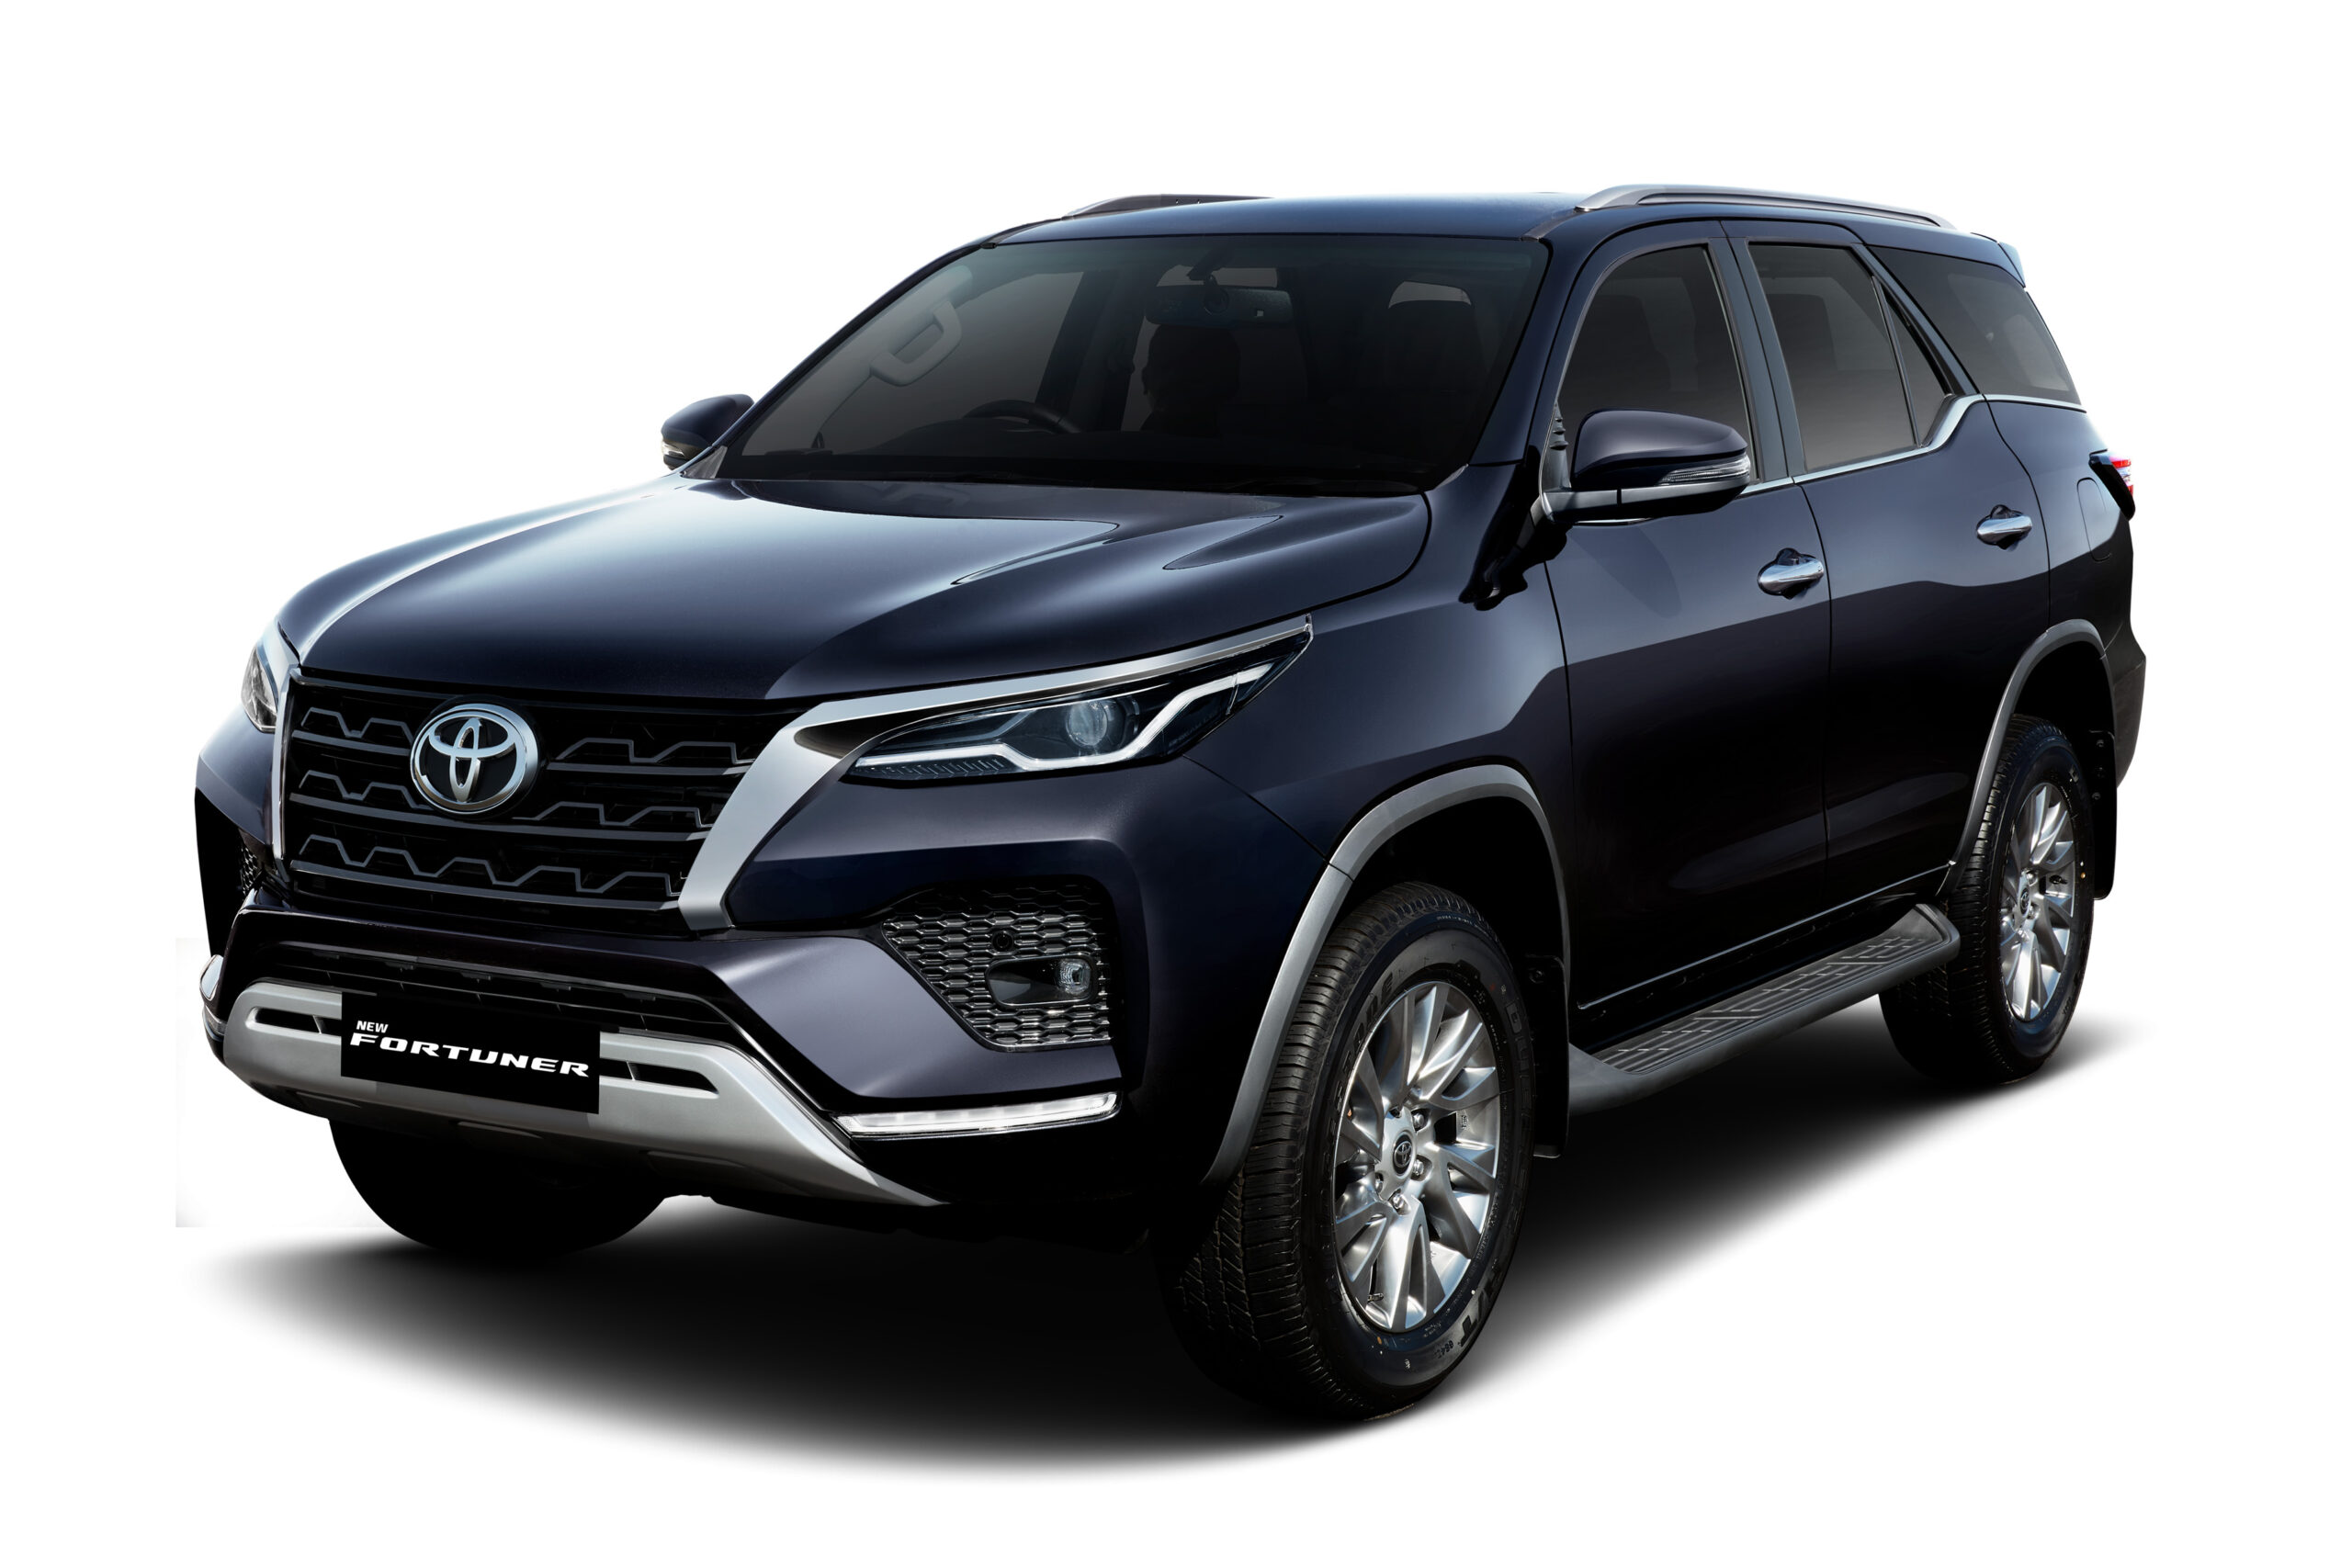 New Toyota  Fortuner  and Legender Launched in India   TechVorm